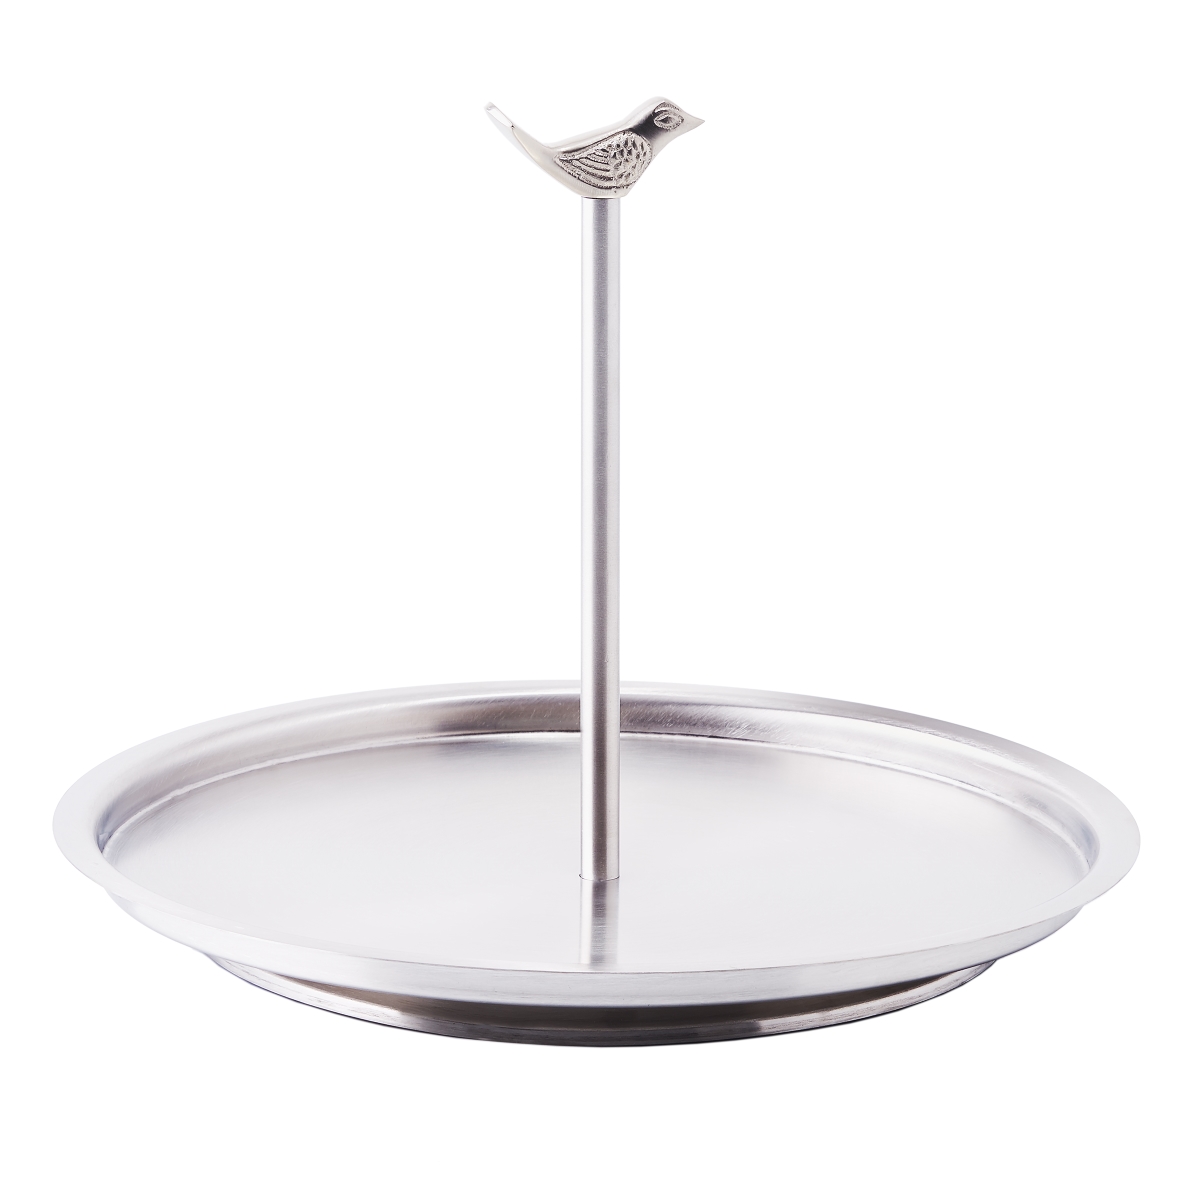 2290 Churp Single Tier Stainless Steel Serving Tray With Bird Knob